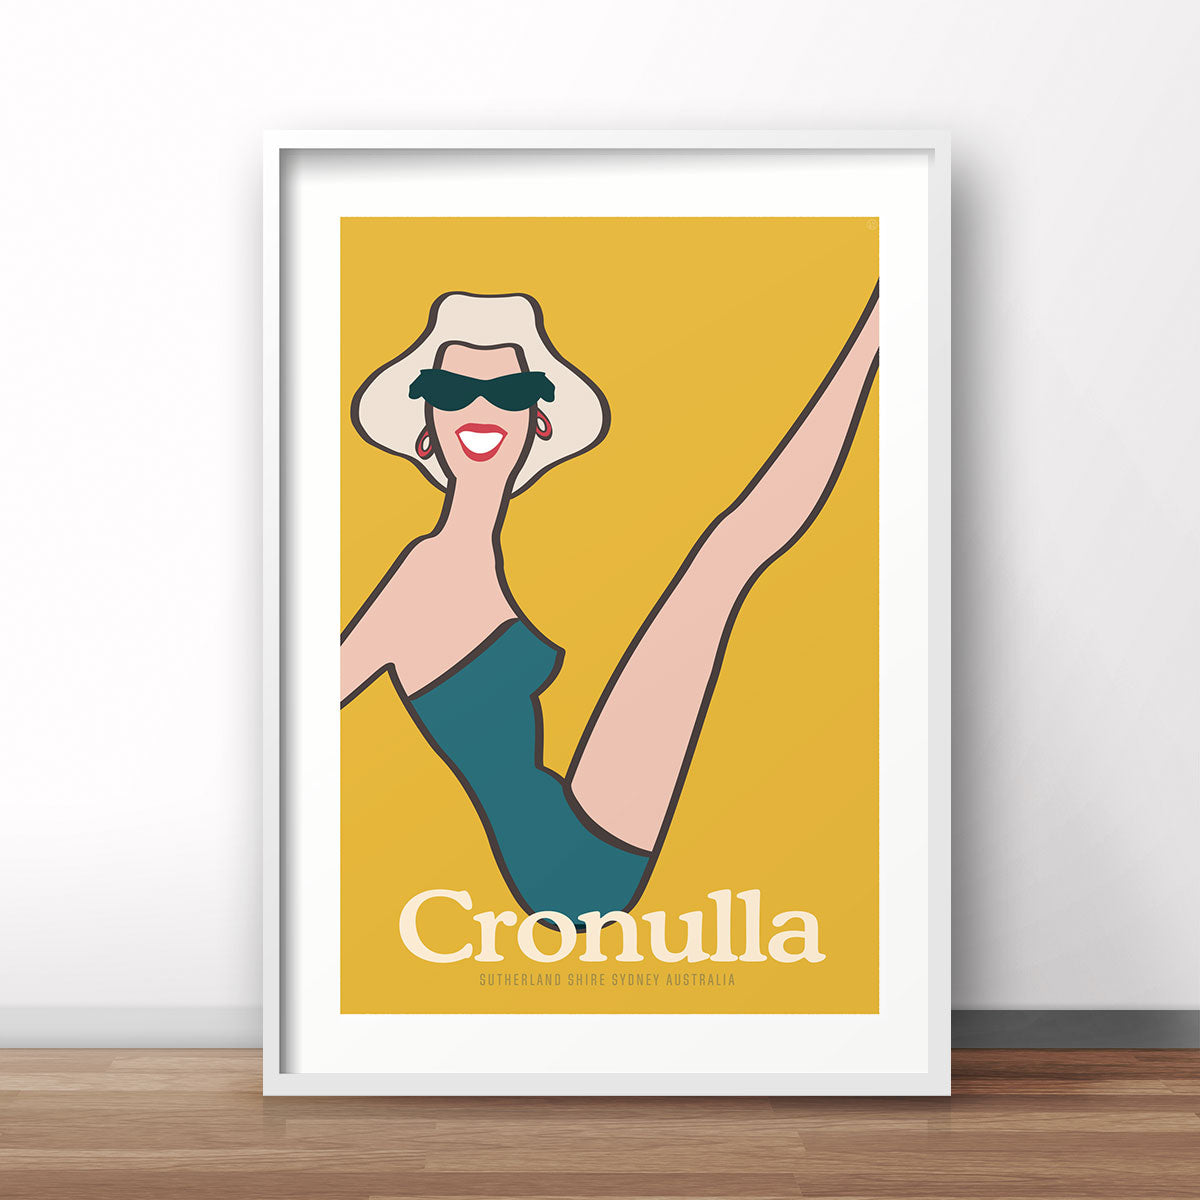 Cronulla beach girl retro vintage print from Places We Luv